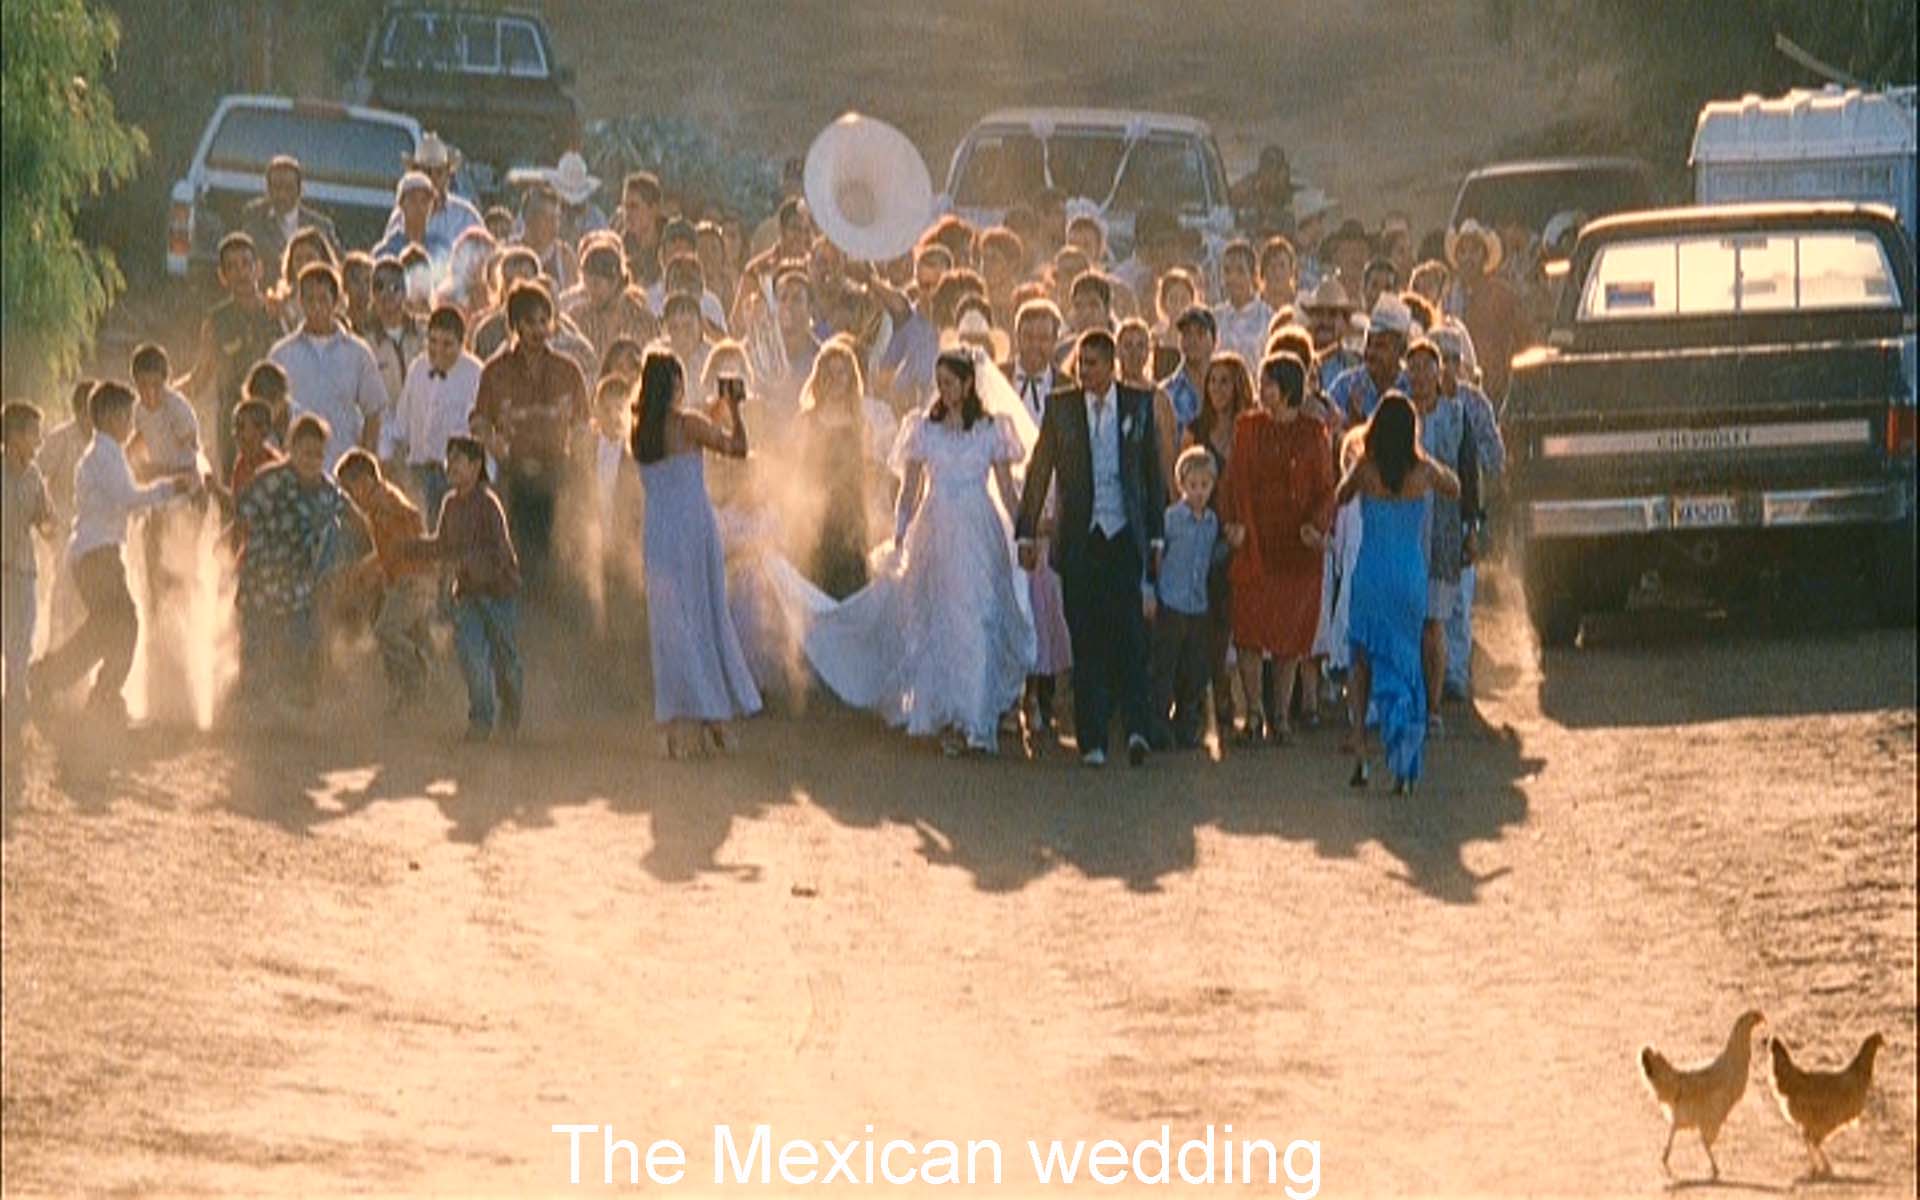 The Mexican wedding